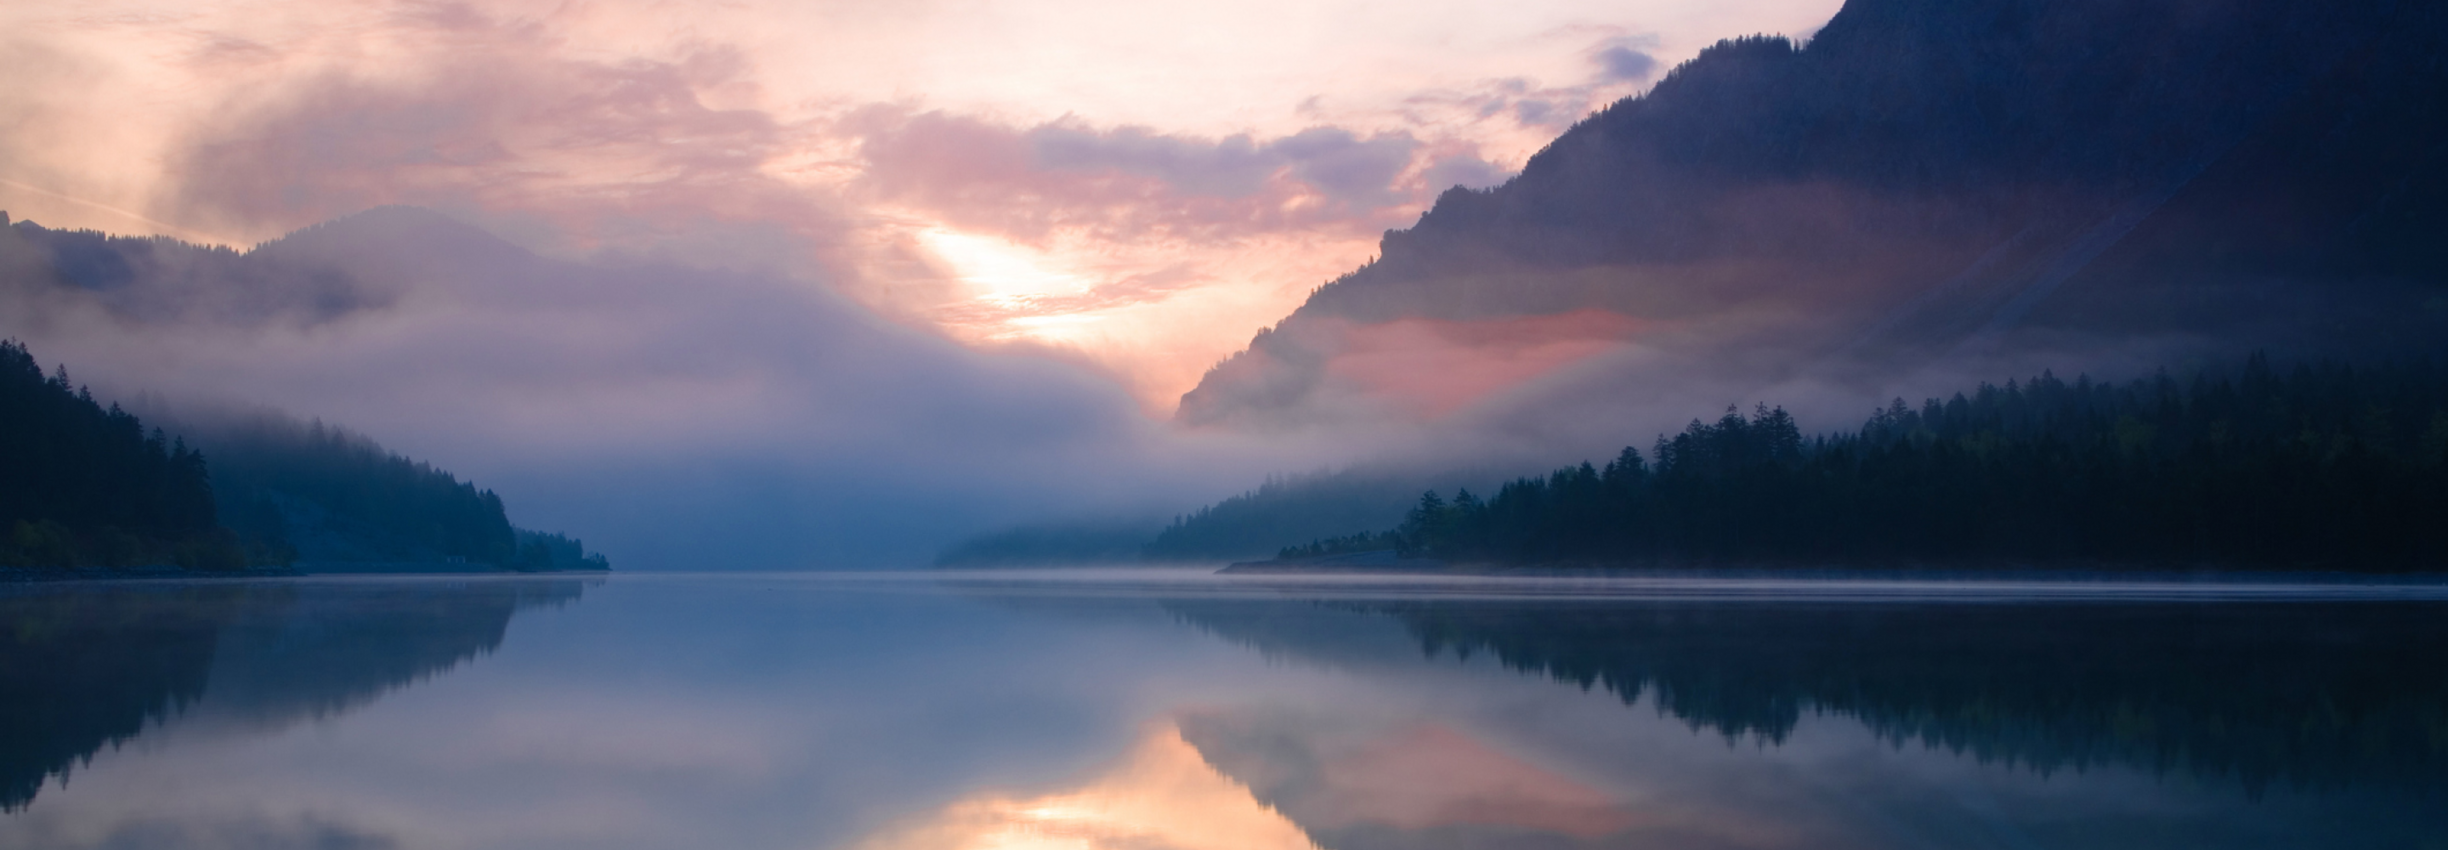 Mist over a mountain lake at sunset